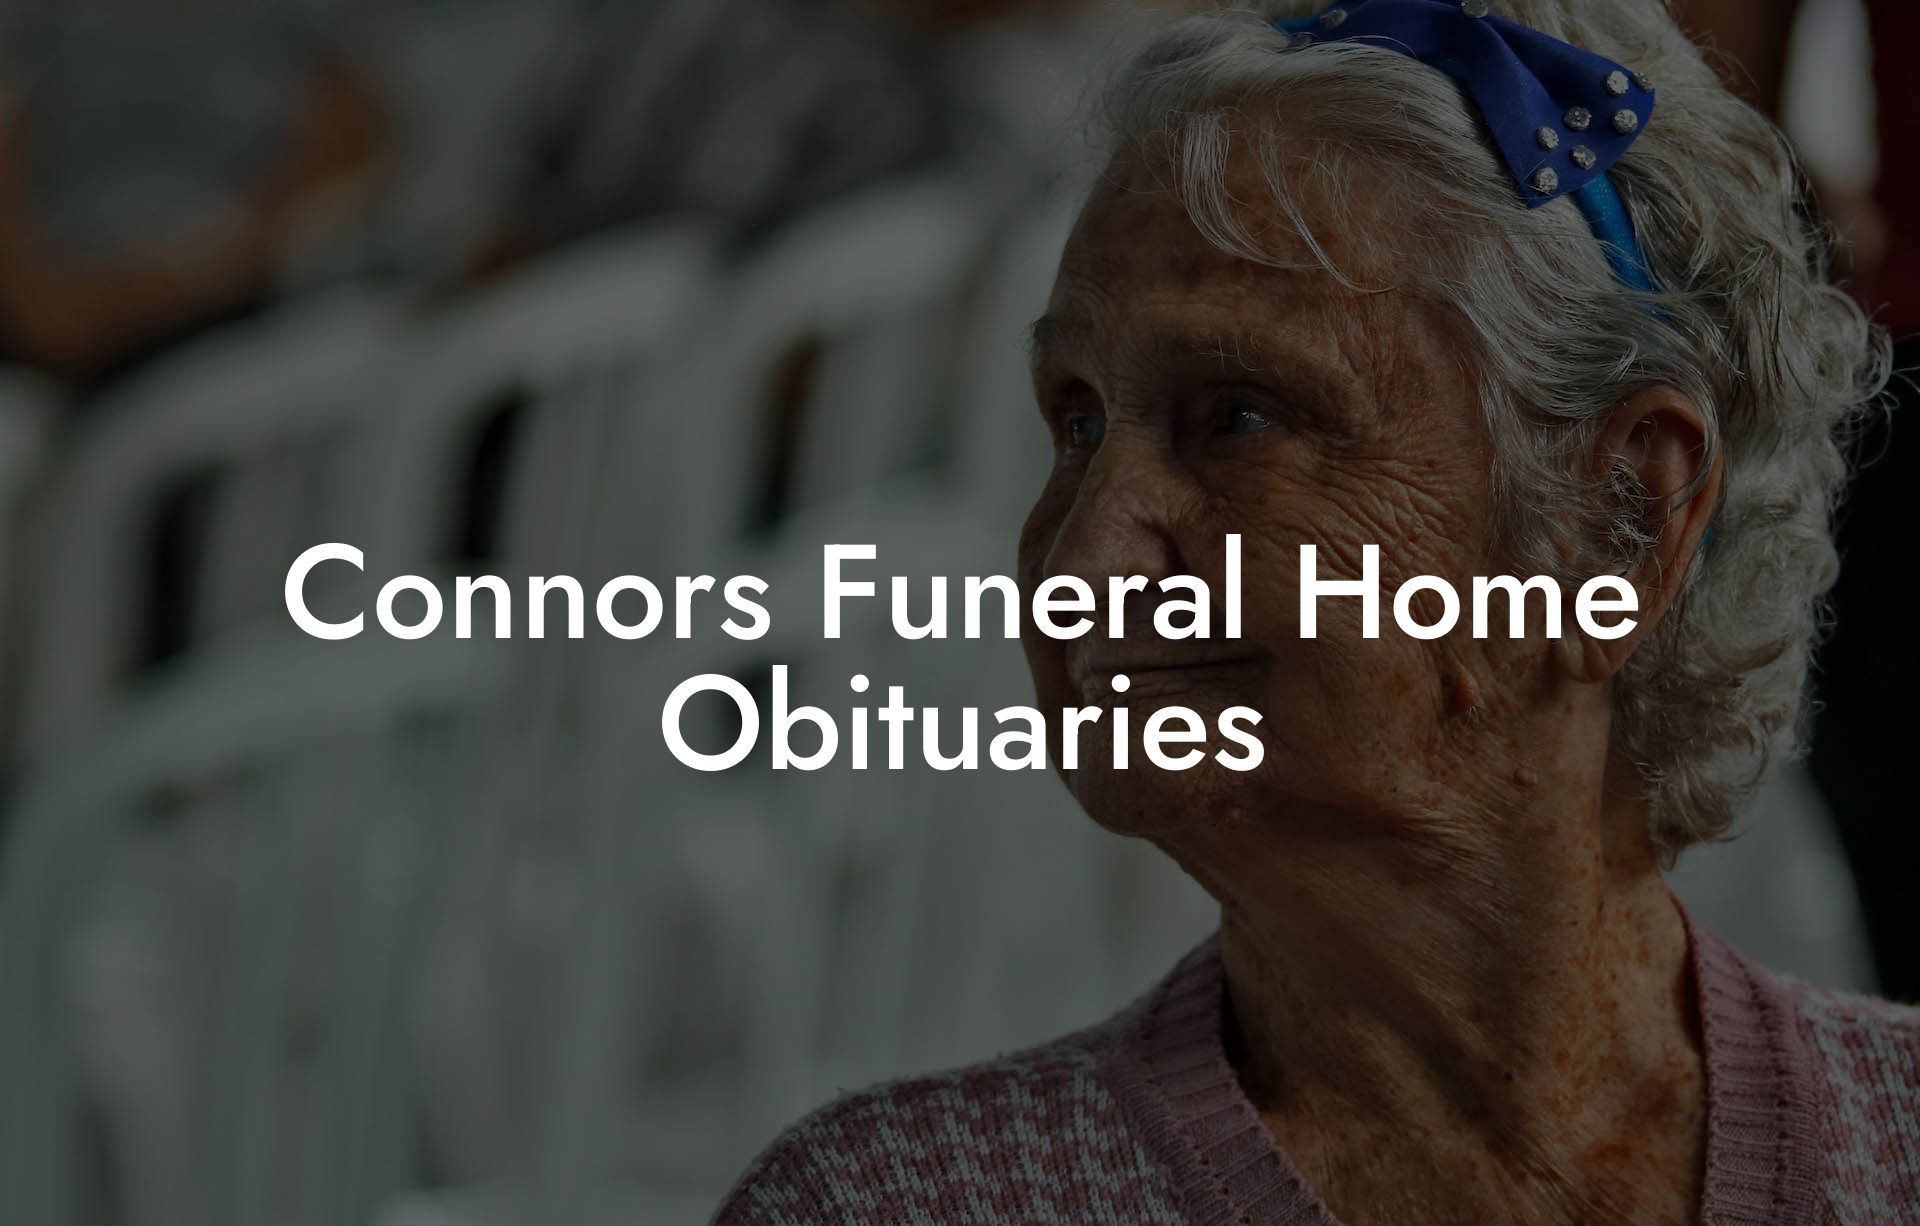 Connors Funeral Home Obituaries